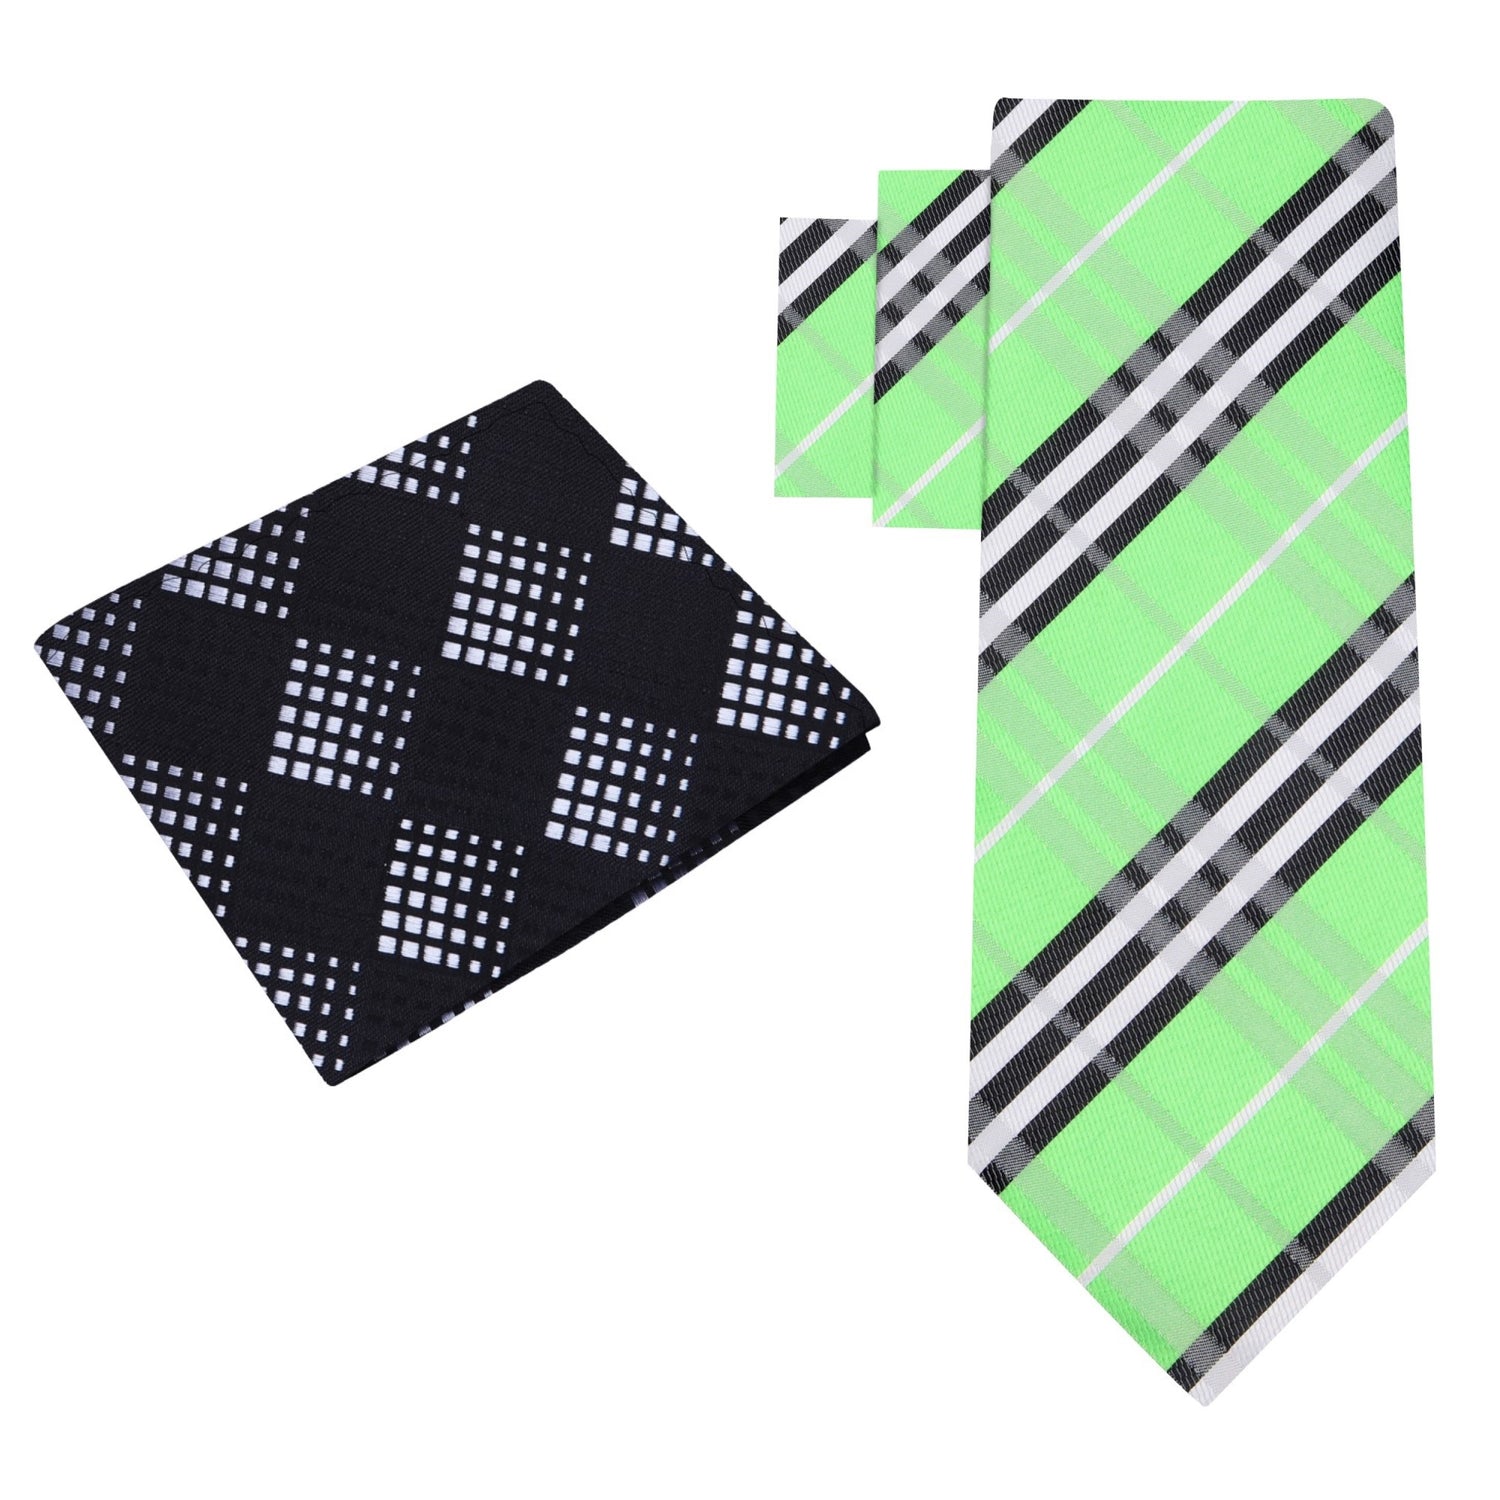 Alt view: Green, Black, White Plaid Necktie and Black Accenting Square